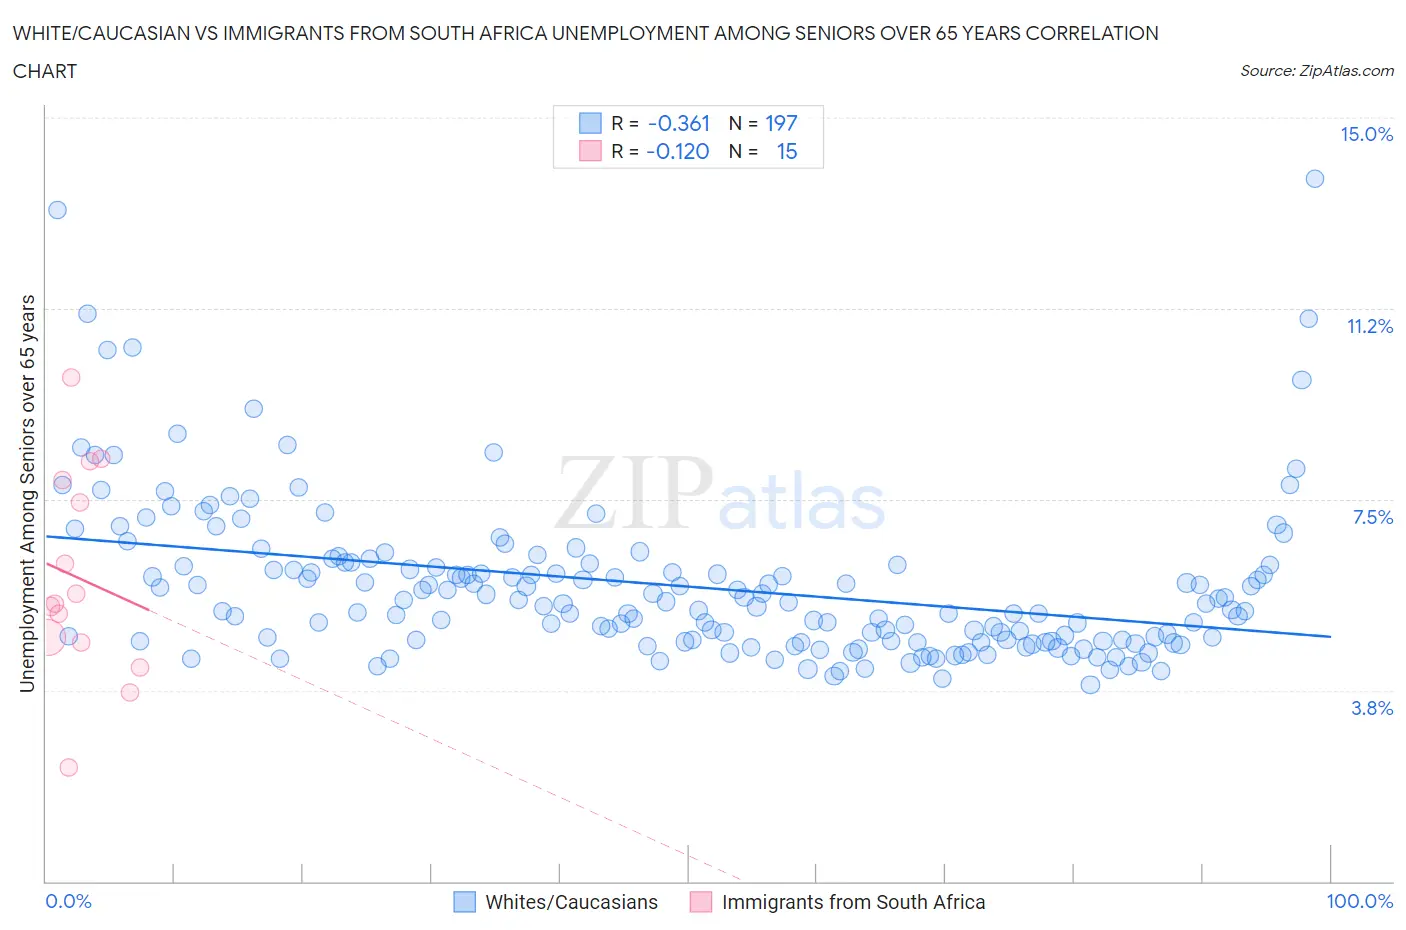 White/Caucasian vs Immigrants from South Africa Unemployment Among Seniors over 65 years